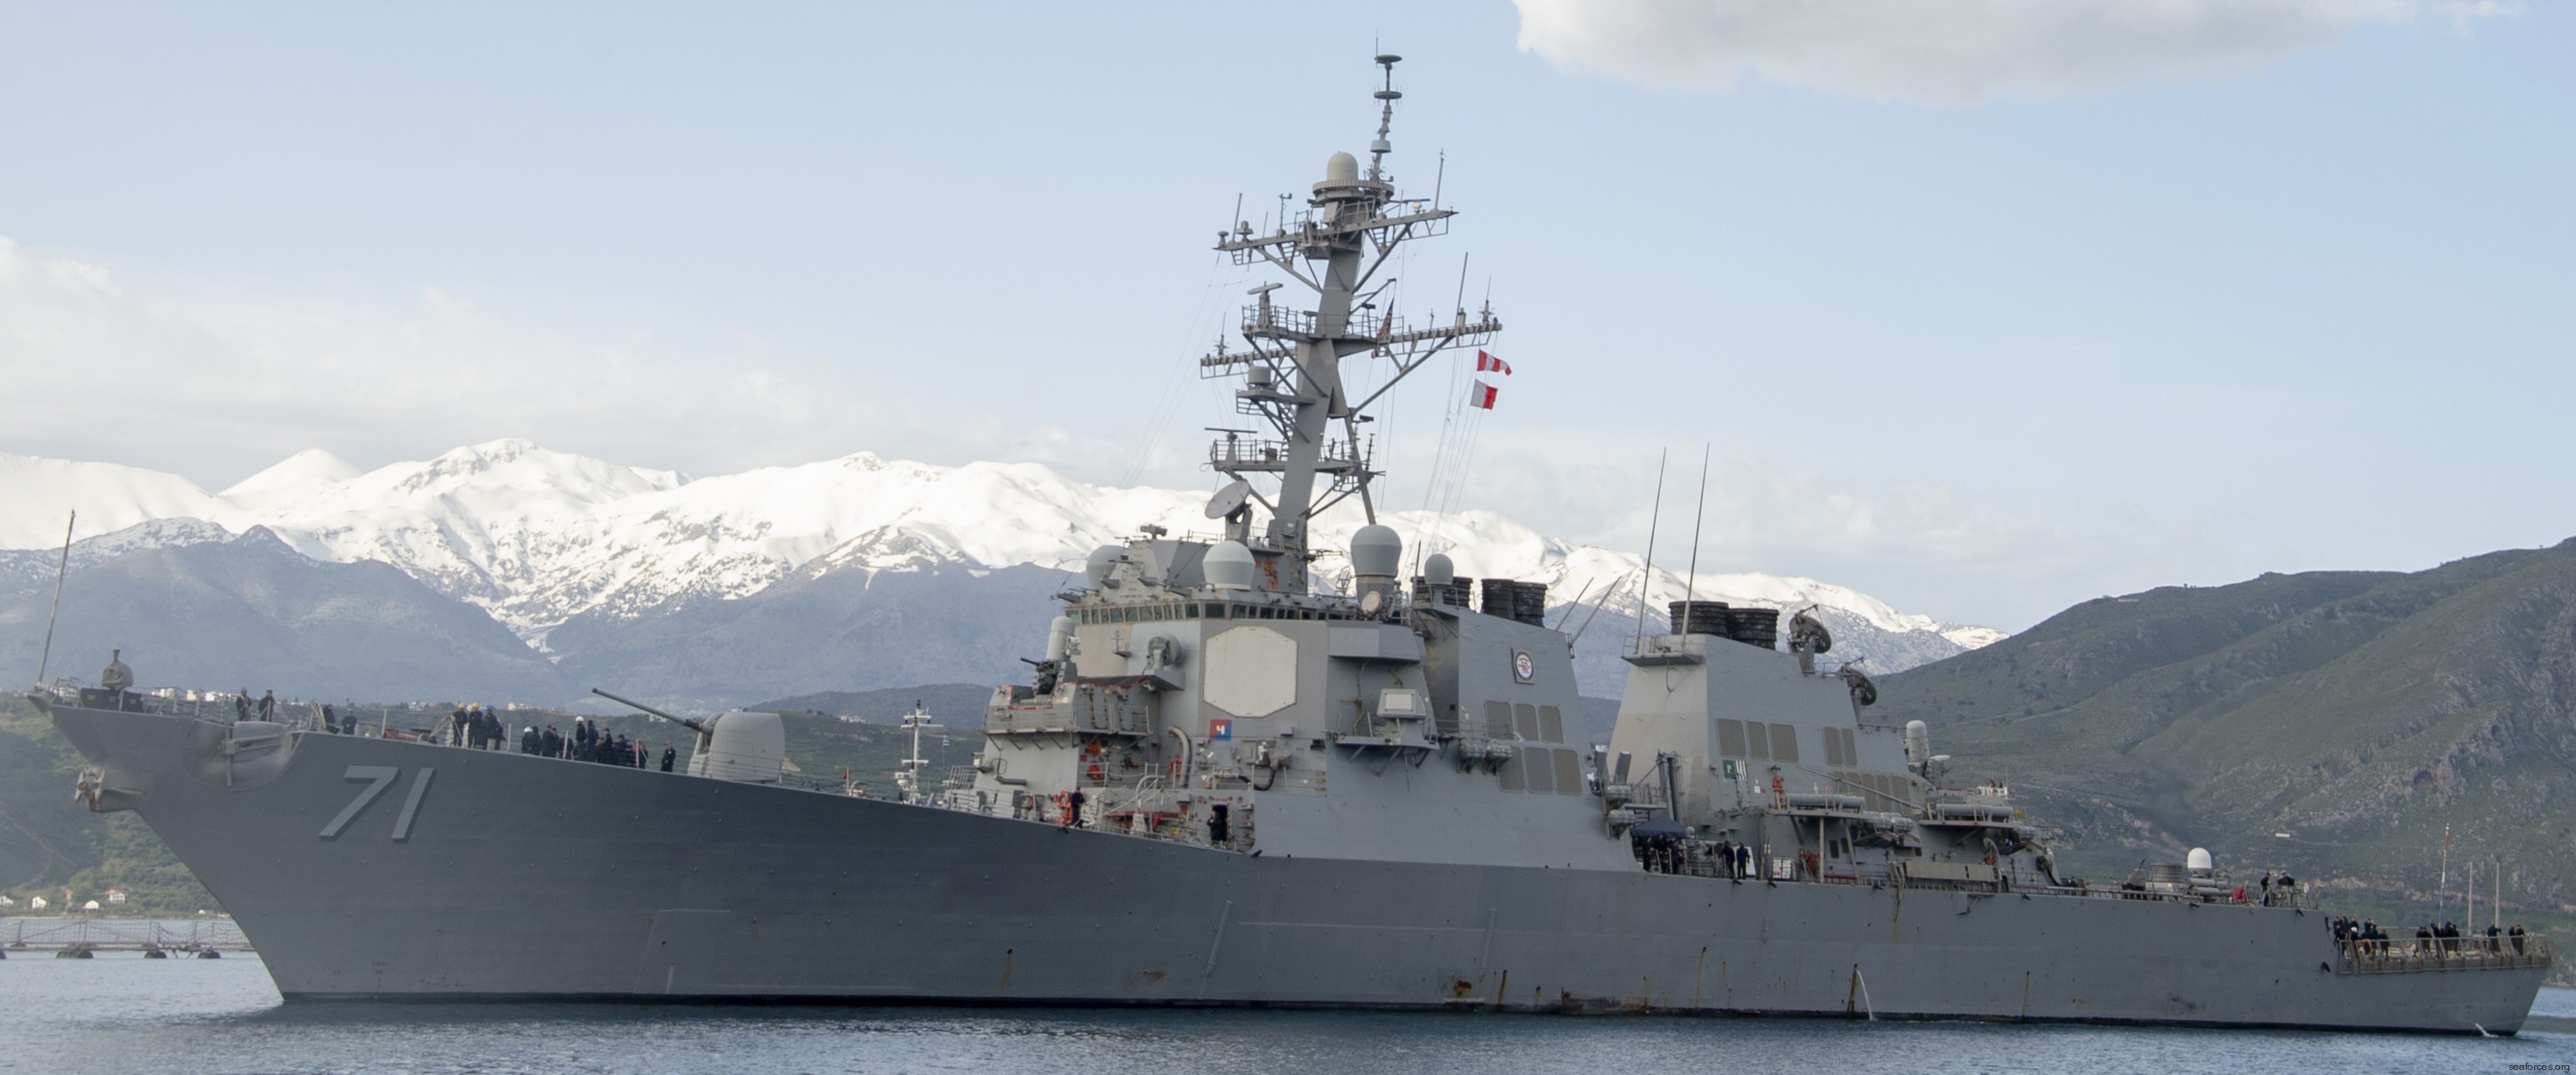 ddg-71 uss ross guided missile destroyer arleigh burke class aegis bmd 13